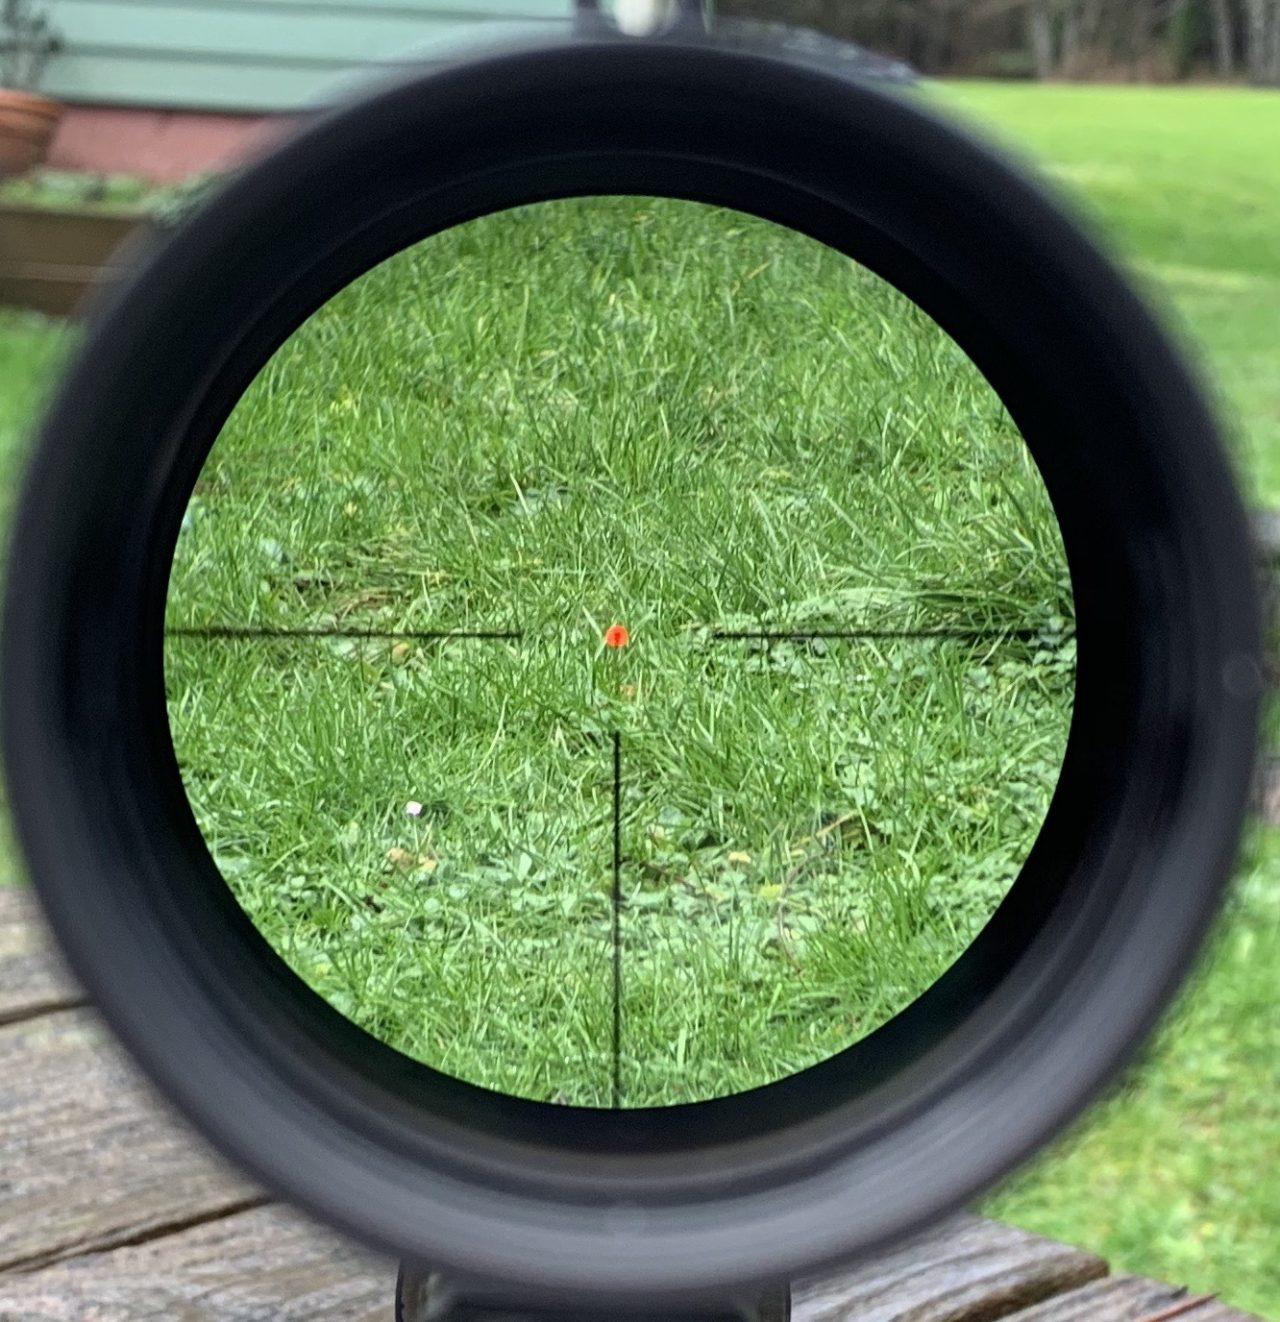 The bold crosshairs draw your eye to the reticle. The reticle is nice and bright on overcast days in the Pacific Northwest